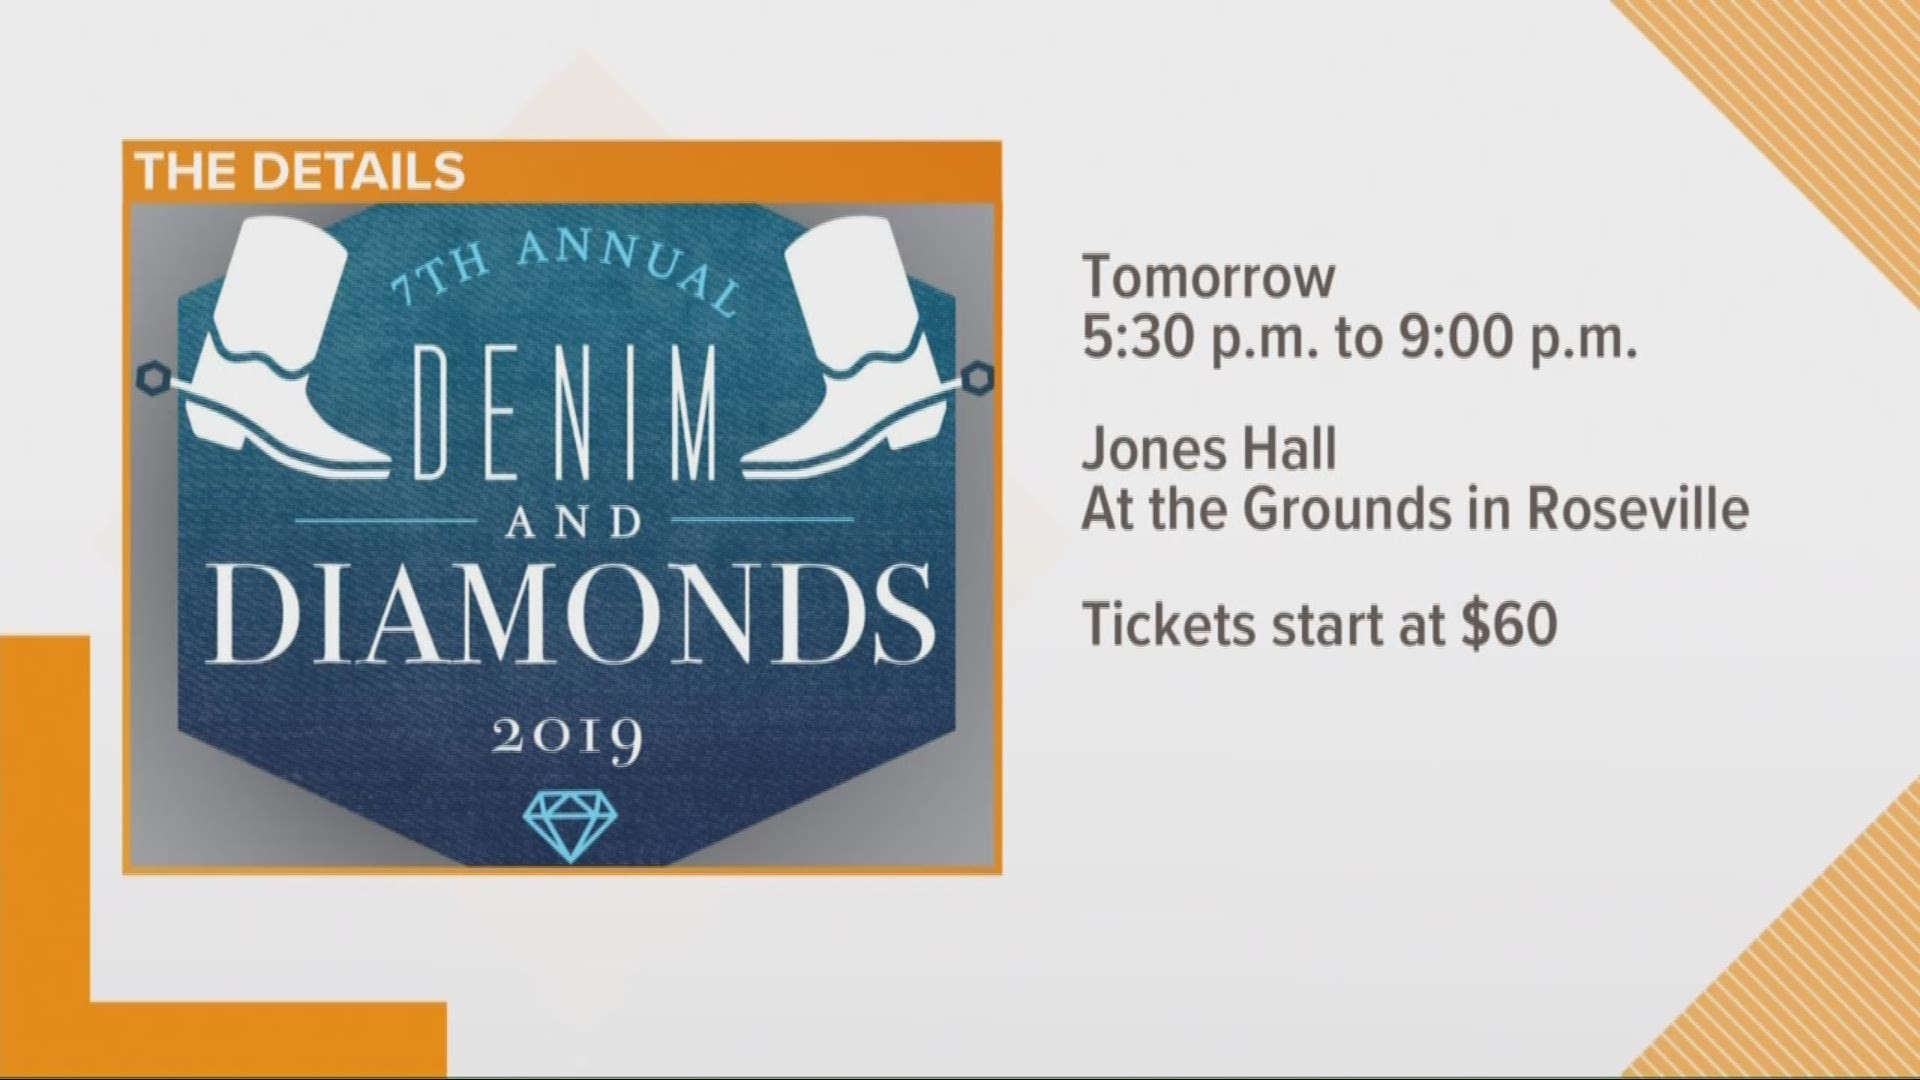 Denim & Diamonds tickets are available at KidsFirstNow.org